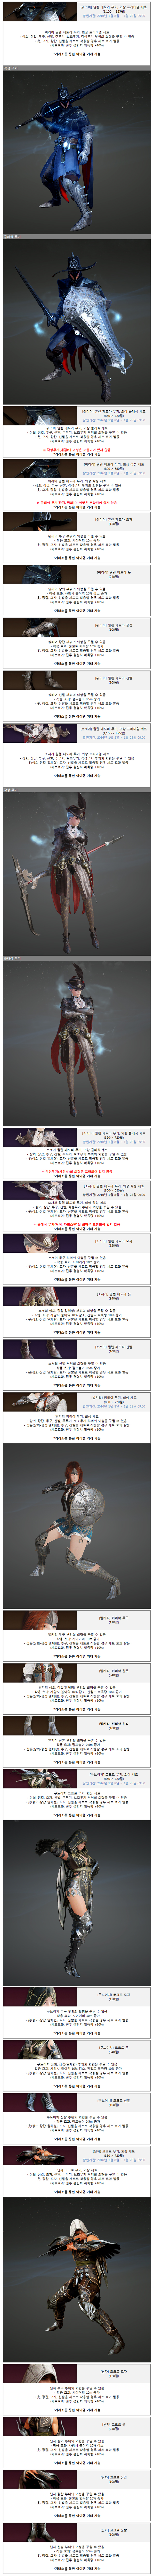 08/01/2016 Translated Patch Notes (KR)